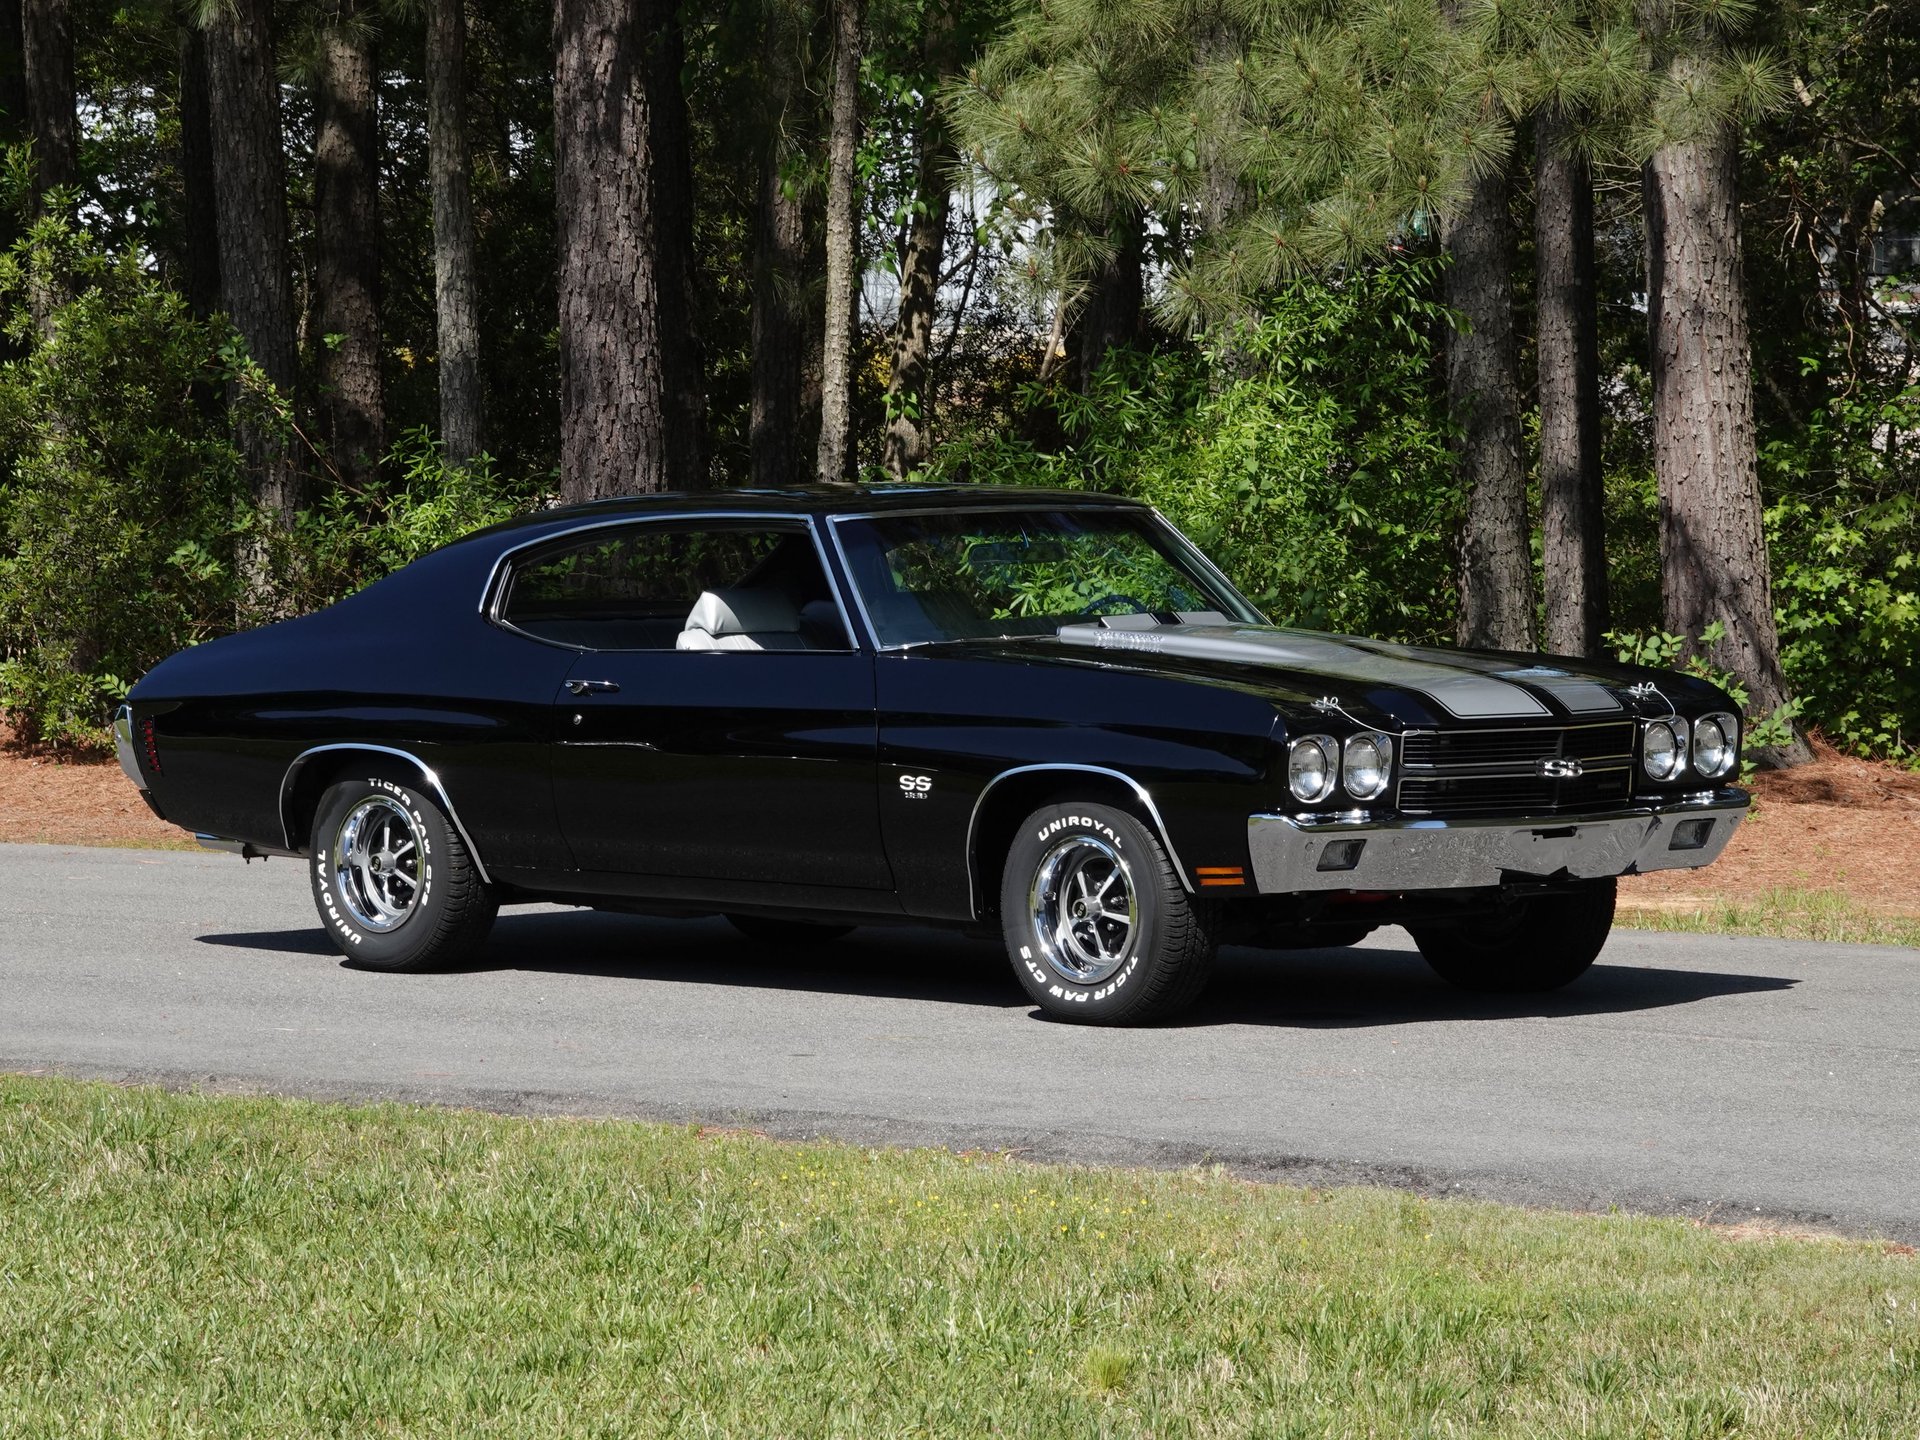 1970 Chevrolet Chevelle SS | Raleigh Classic Car Auctions